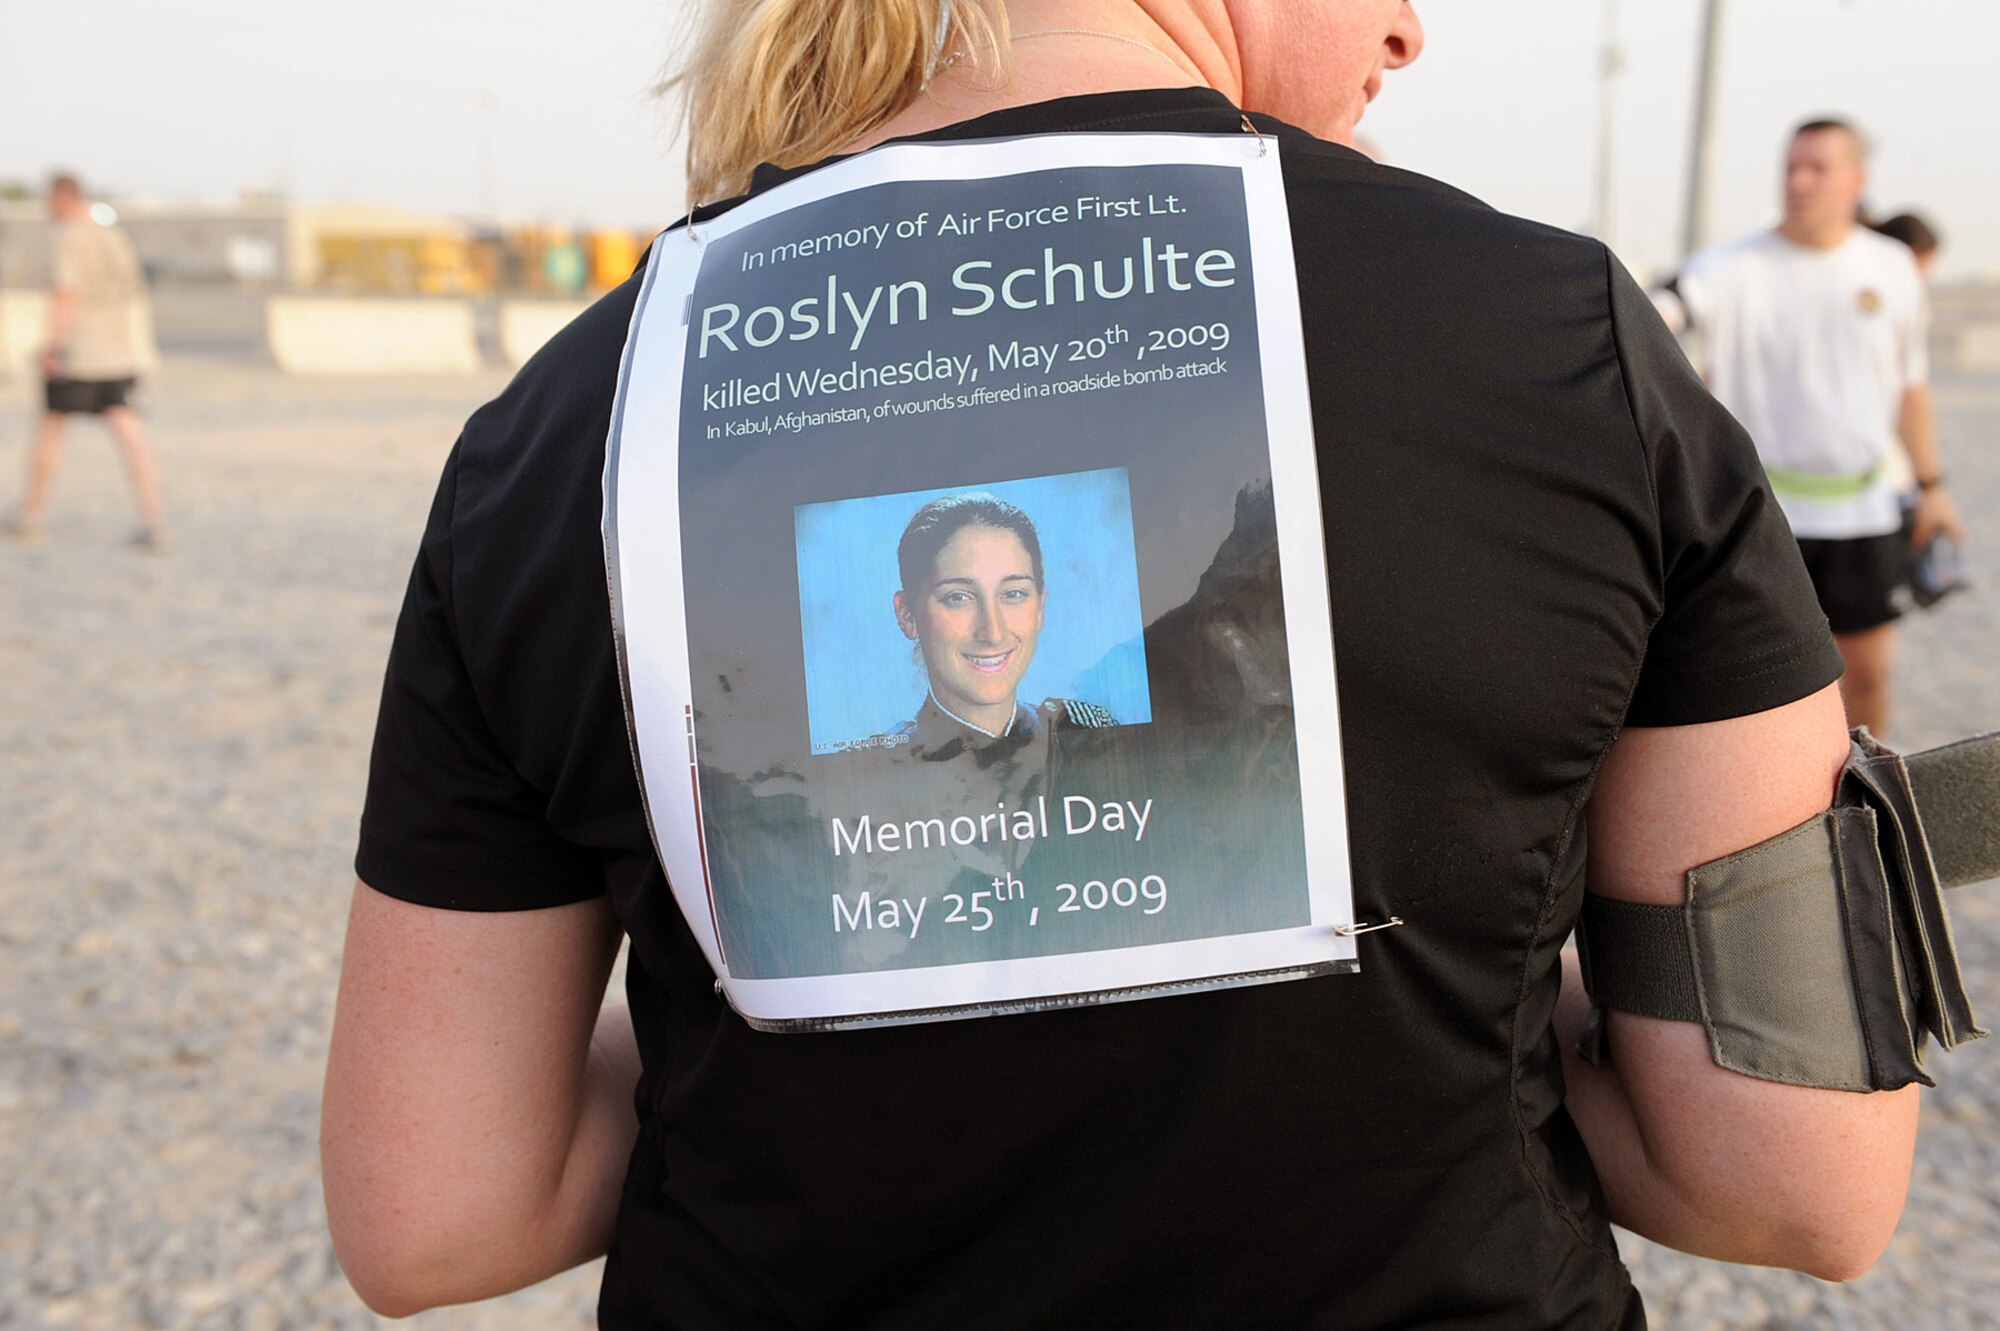 SOUTHWEST ASIA -- Navy Petty Officer 1st Class Kelli Roesch of Portland, Ore., wears a sign in honor of fallen servicemember Air Force 1st. Lt. Roslyn Schulte during a Memorial Day 5K run May 25. Lieutenant Schulte died May 20th in Afghanistan from a roadside bomb. Petty Officer Roesch trained with Lieutenant Schulte at Ft. Lewis, Wash., prior to their transfer to separate locations in the Middle East. "First Lt. Schulte was a great officer and even better person whose loss is rippling across many friends and fellow servicemembers who knew and admired her," said Petty Officer Roesch.   (U.S. Navy photo by Navy Petty Officer 2nd Class Jorge Saucedo)